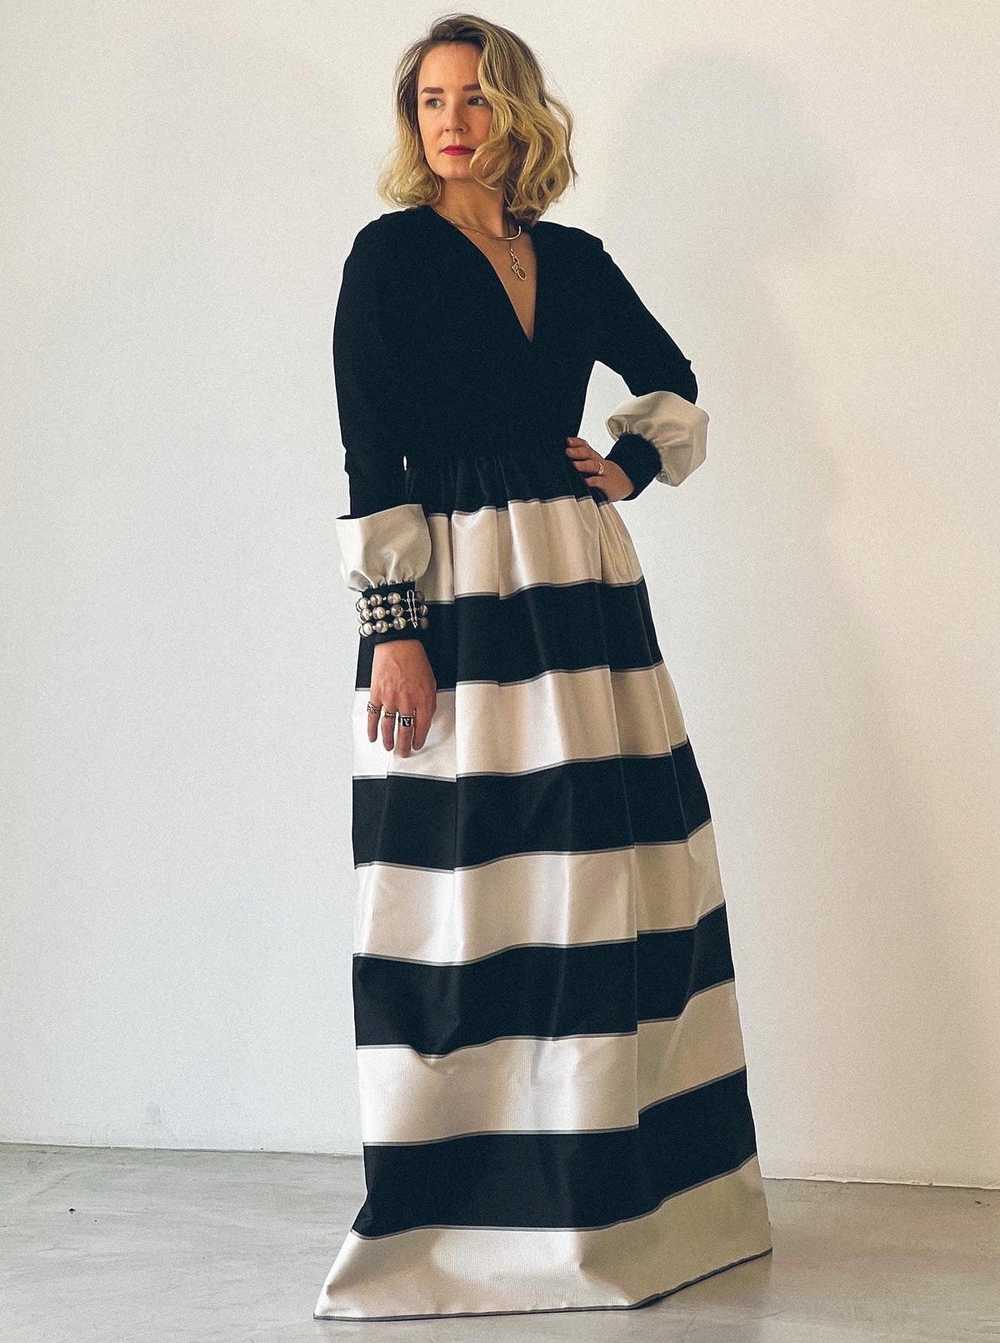 Pauline Trigere Black and White Striped Gown - image 2